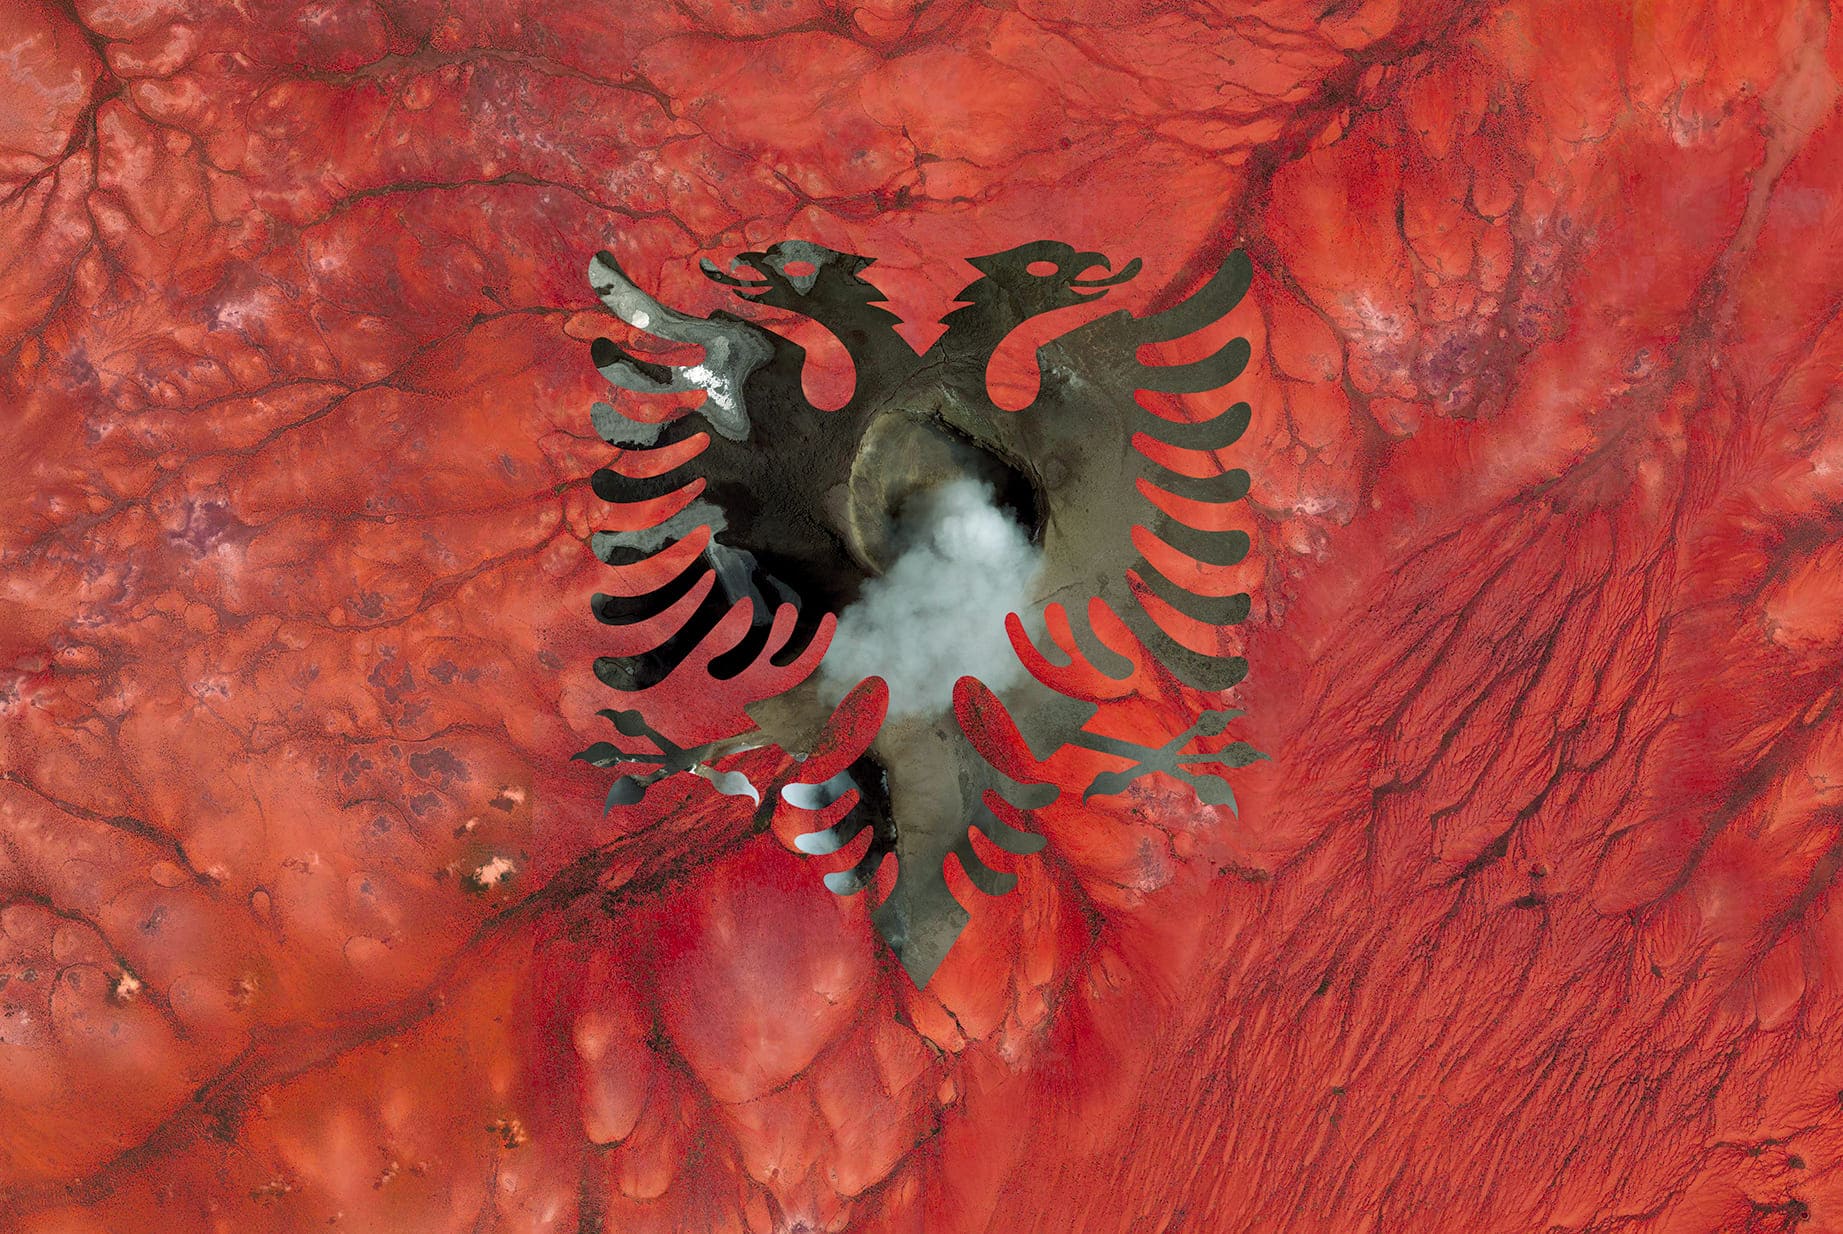 ALBANIA EARTH FLAG, 2016, DIGITAL COLLAGE OF SATELLITE PHOTOGRAPHY FROM ETHIOPIA, ITALY, diasec print CM 67×100, edition of 9